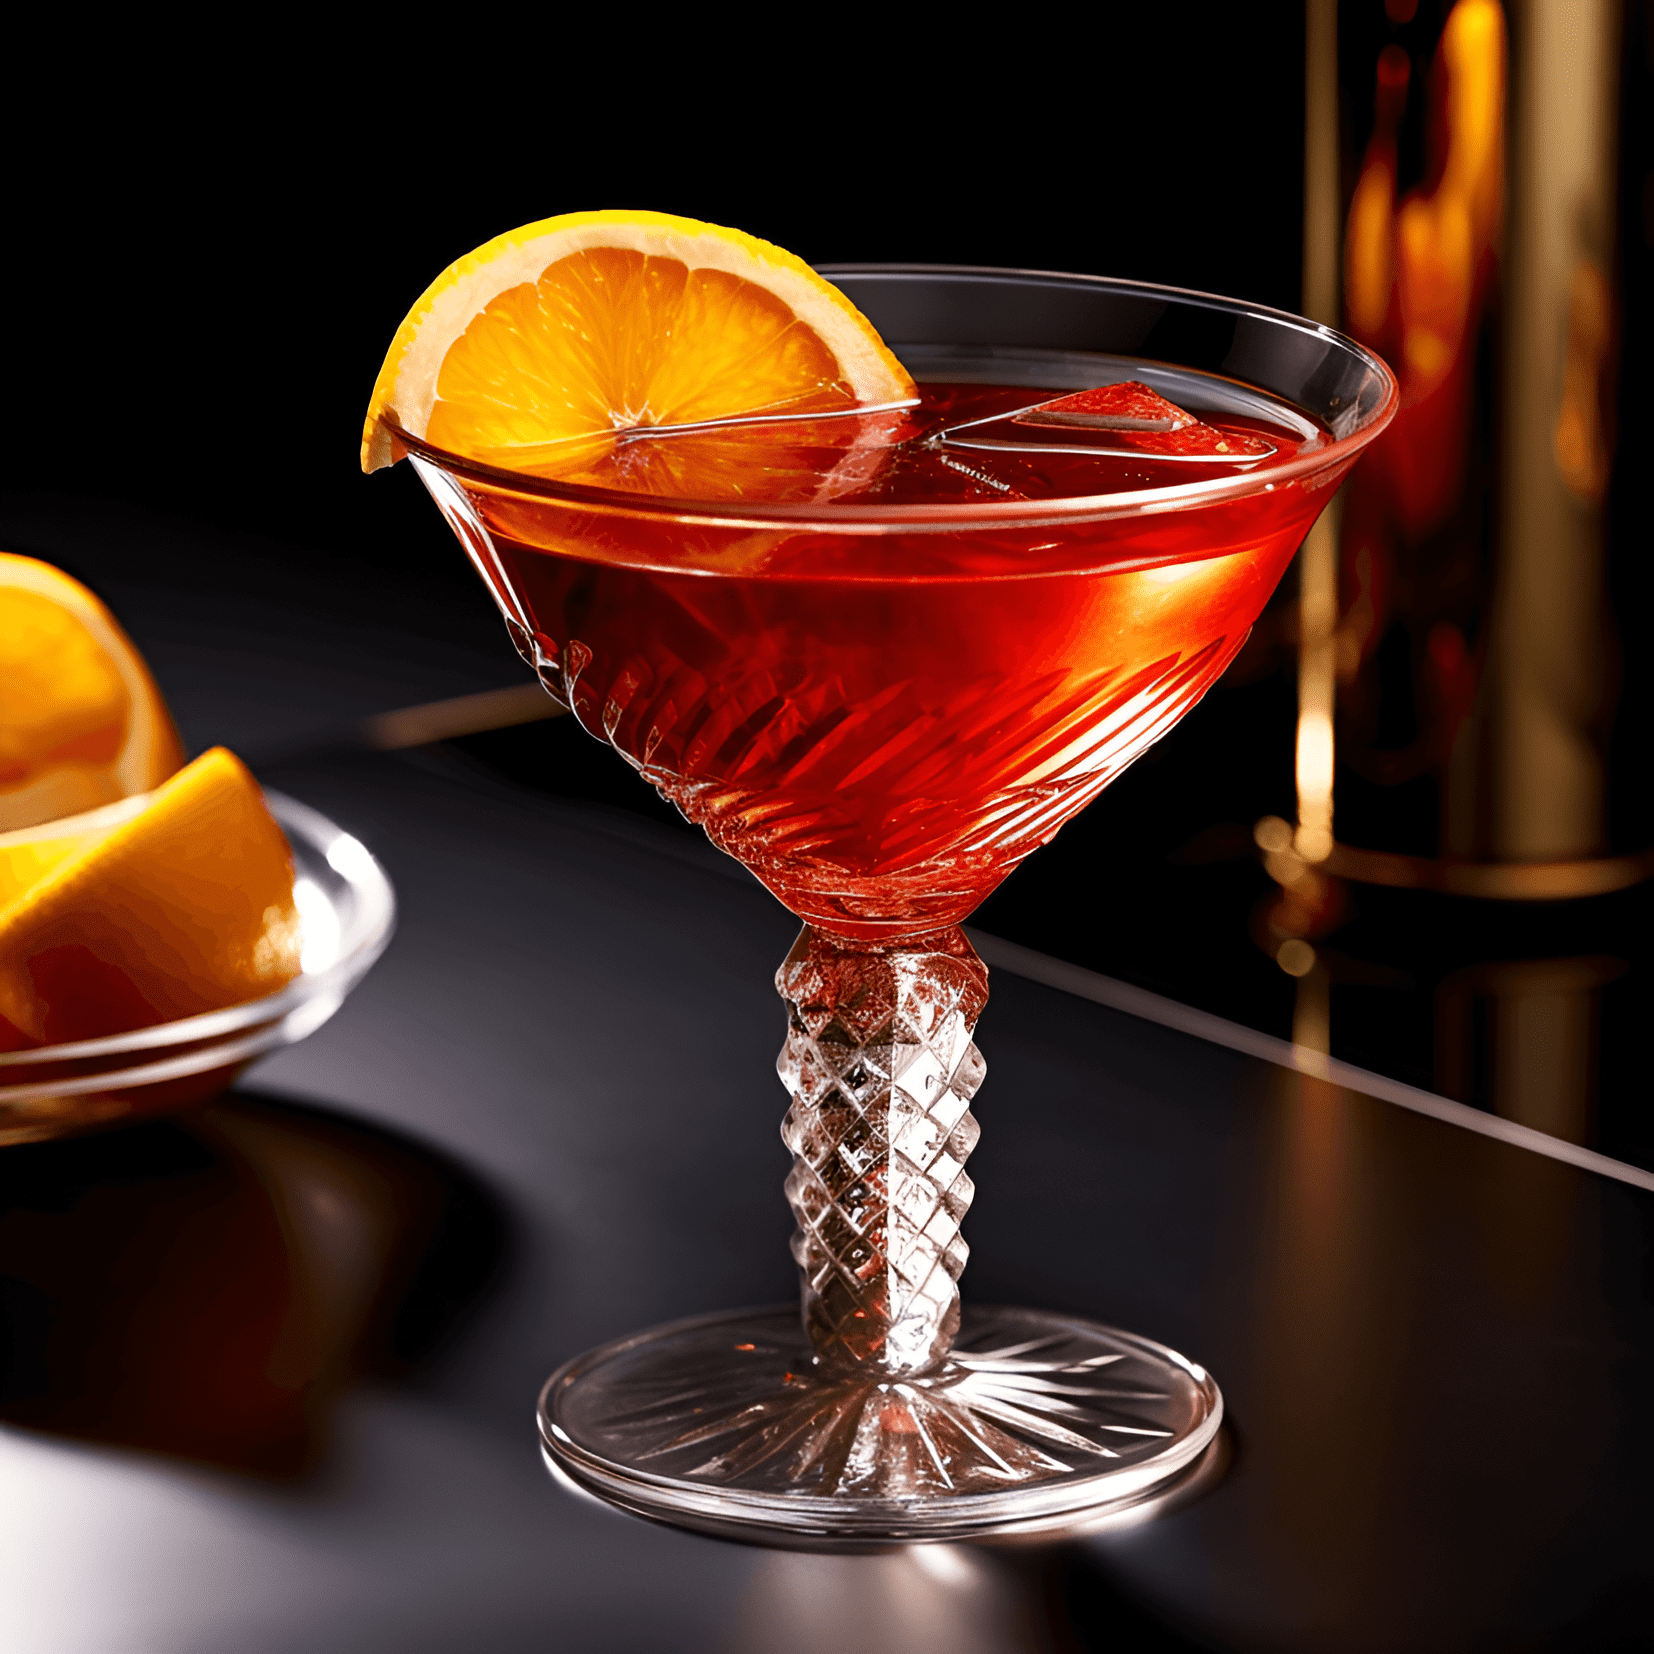 Red Lion Cocktail Recipe - The Red Lion cocktail offers a delightful balance of sweet and sour flavors, with a hint of bitterness from the gin. The orange liqueur adds a citrusy sweetness, while the lemon juice provides a refreshing tartness. The grenadine gives the drink a subtle fruity sweetness, making it a well-rounded and enjoyable cocktail.